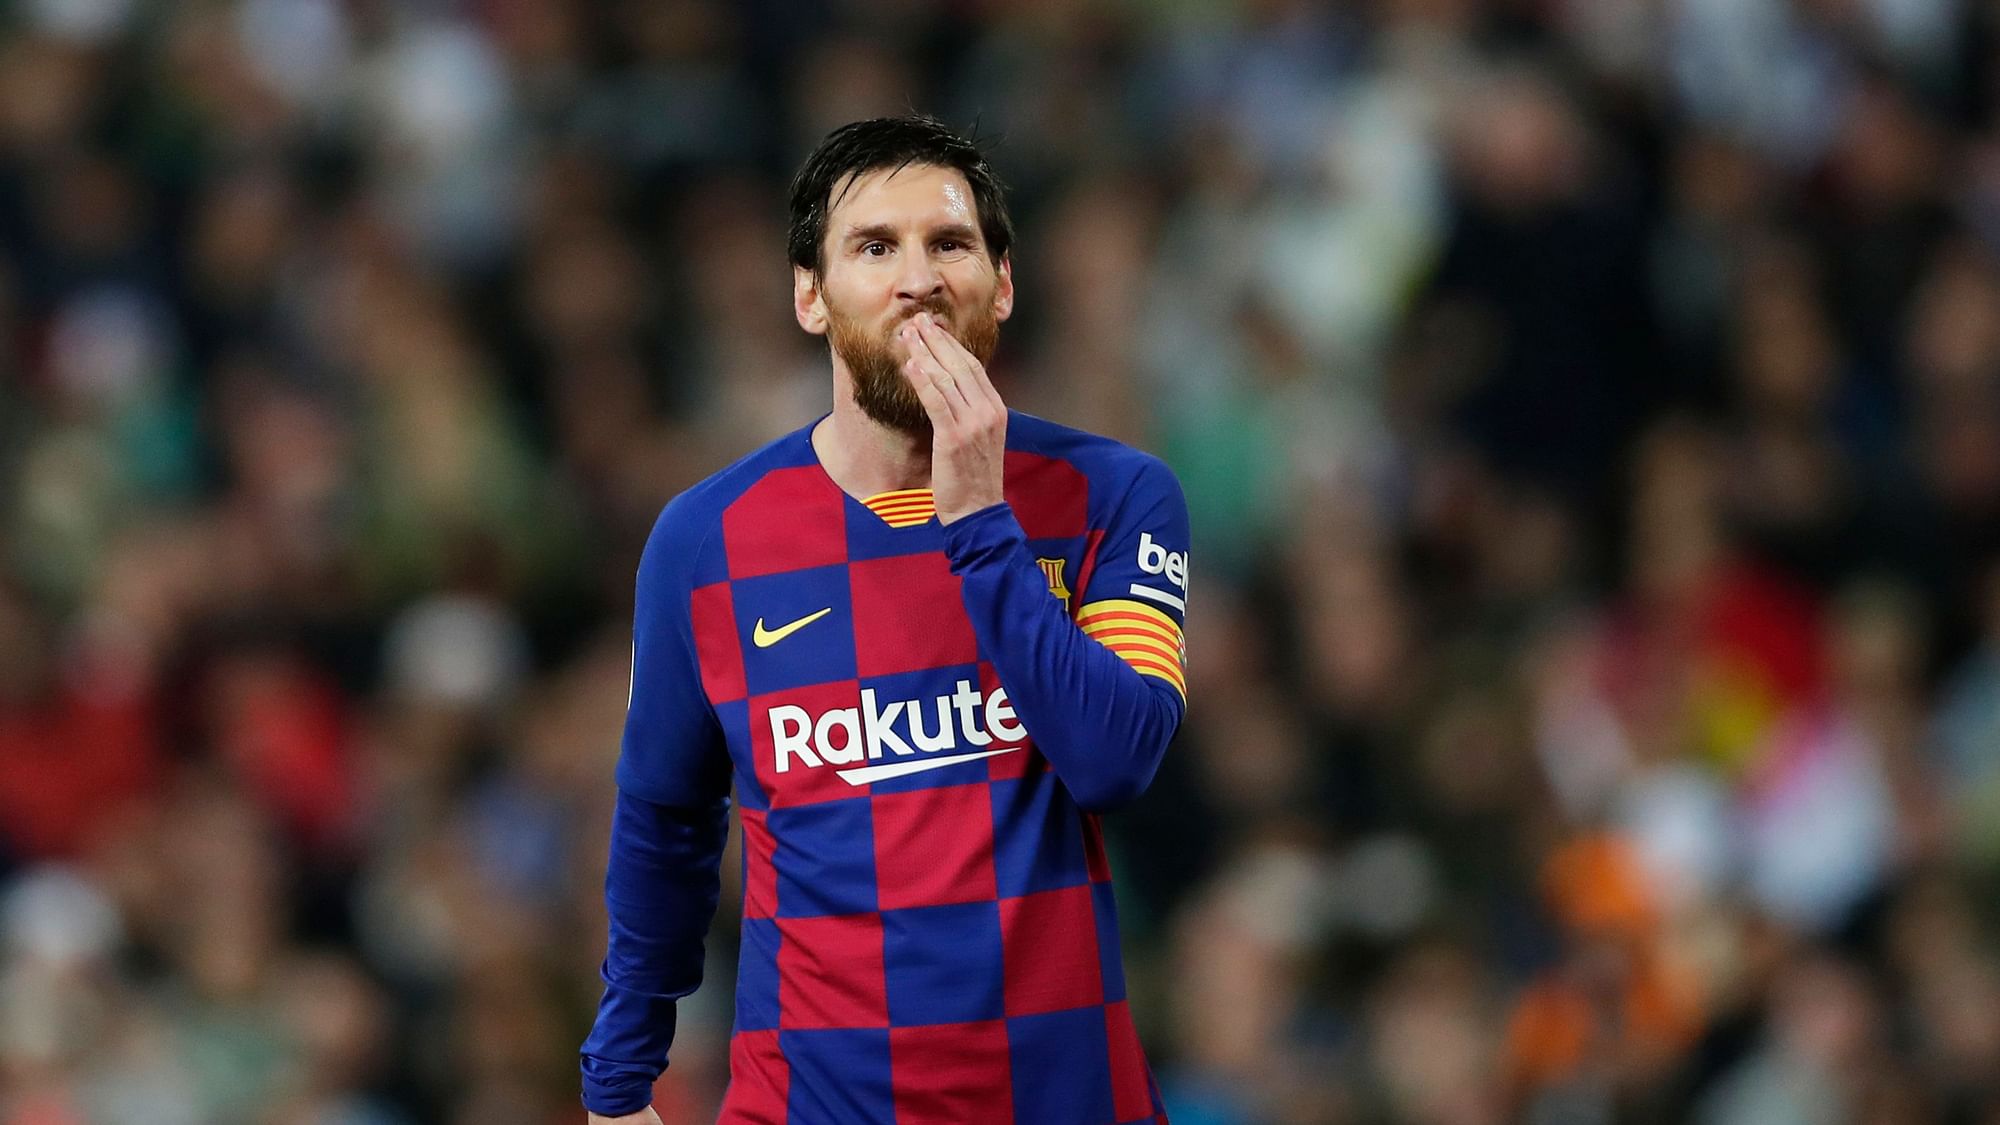 Barcelona’s Lionel Messi reacts during the Spanish La Liga soccer match between Real Madrid and Barcelona at the Santiago Bernabeu stadium in Madrid, Spain.